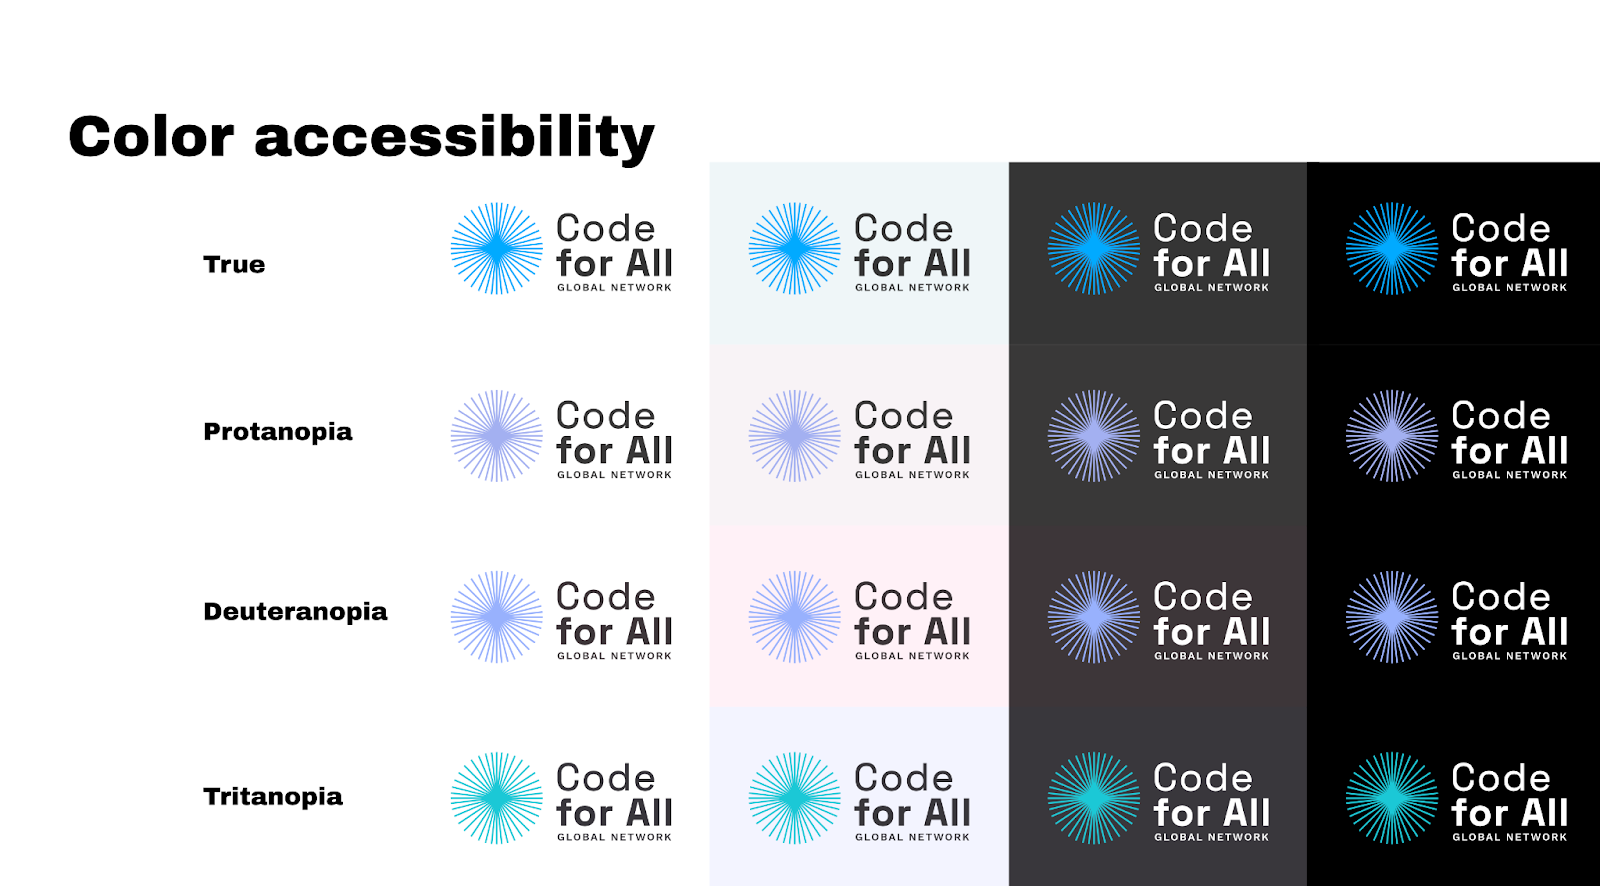 The Code for All logo on different backgrounds.